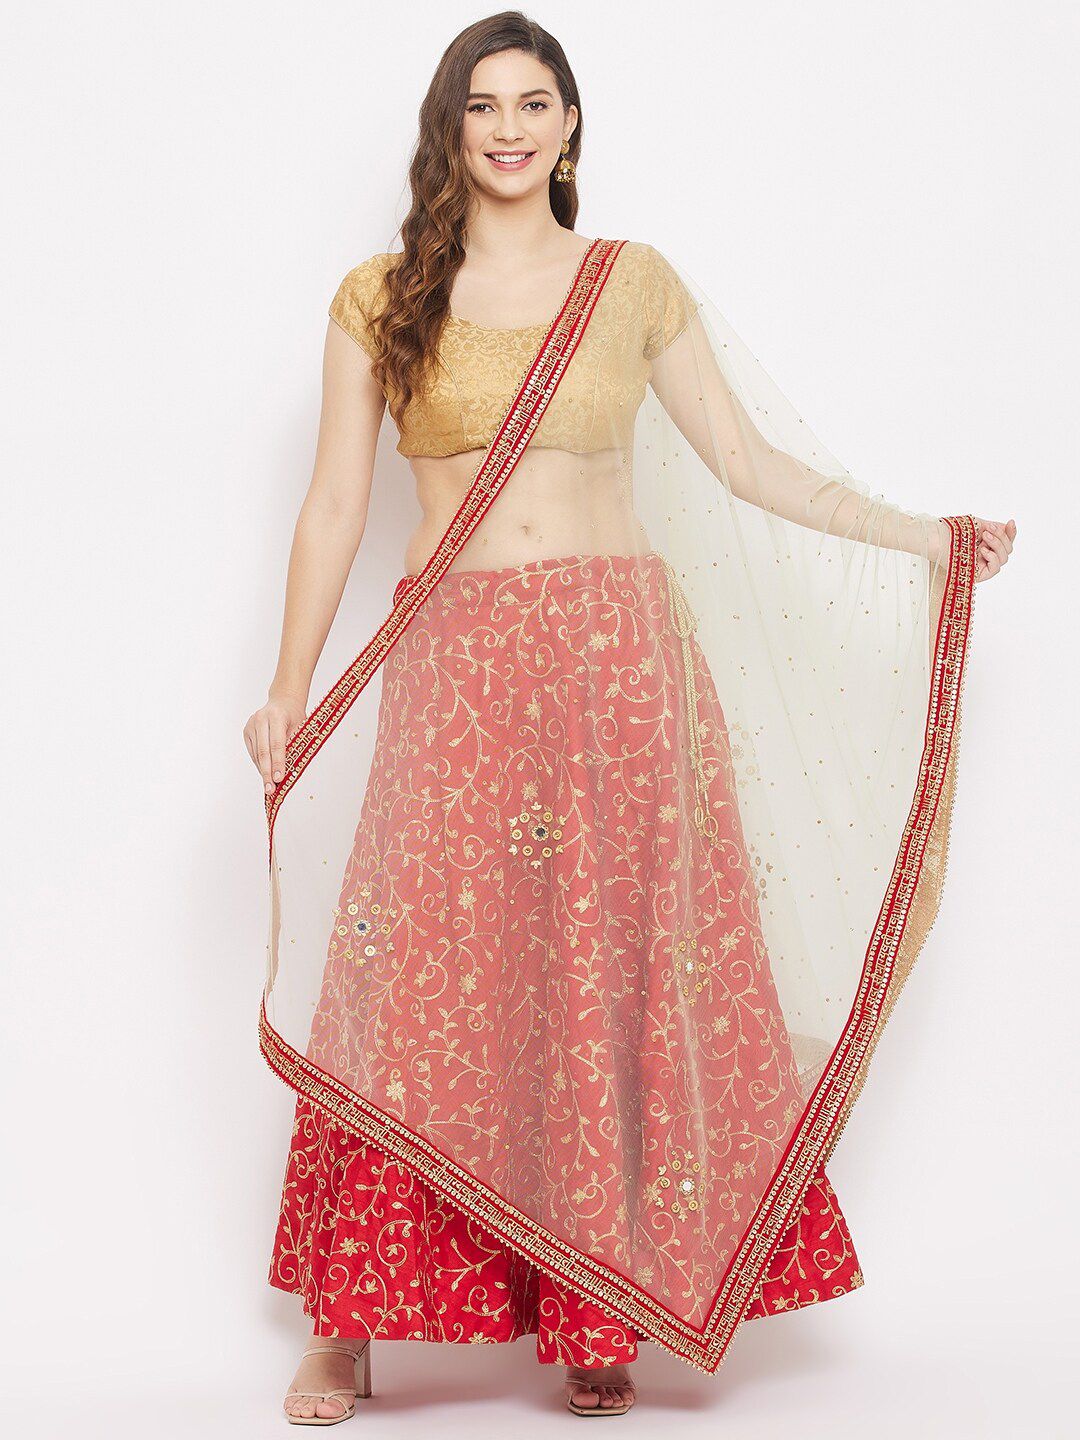 Clora Creation Beige & Red Ethnic Motifs Embroidered Net Dupatta with Beads and Stones Price in India